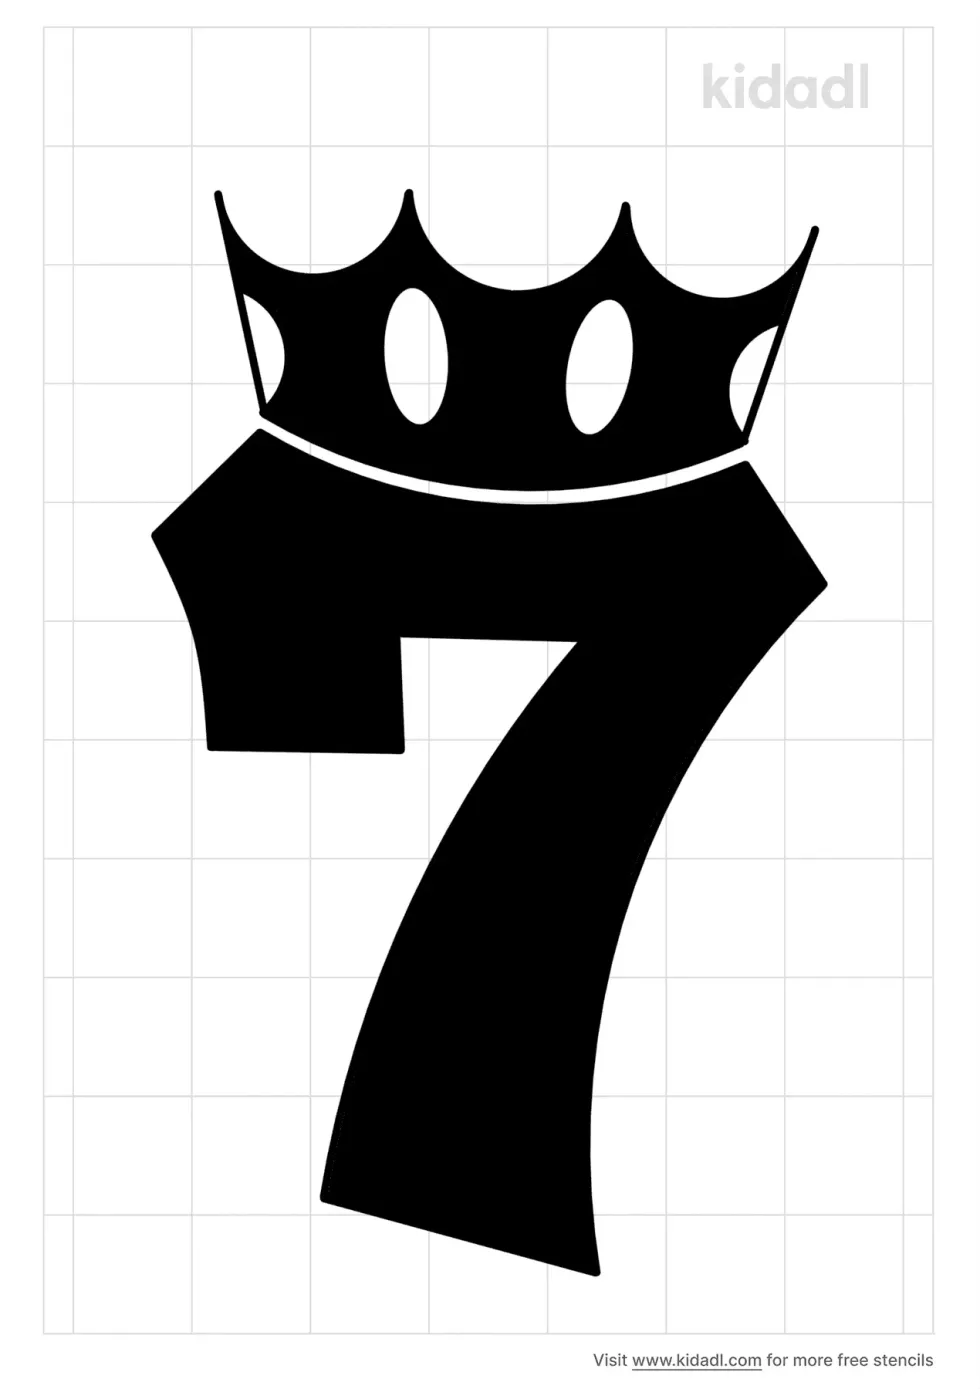 Number 7 With A Crown On Top